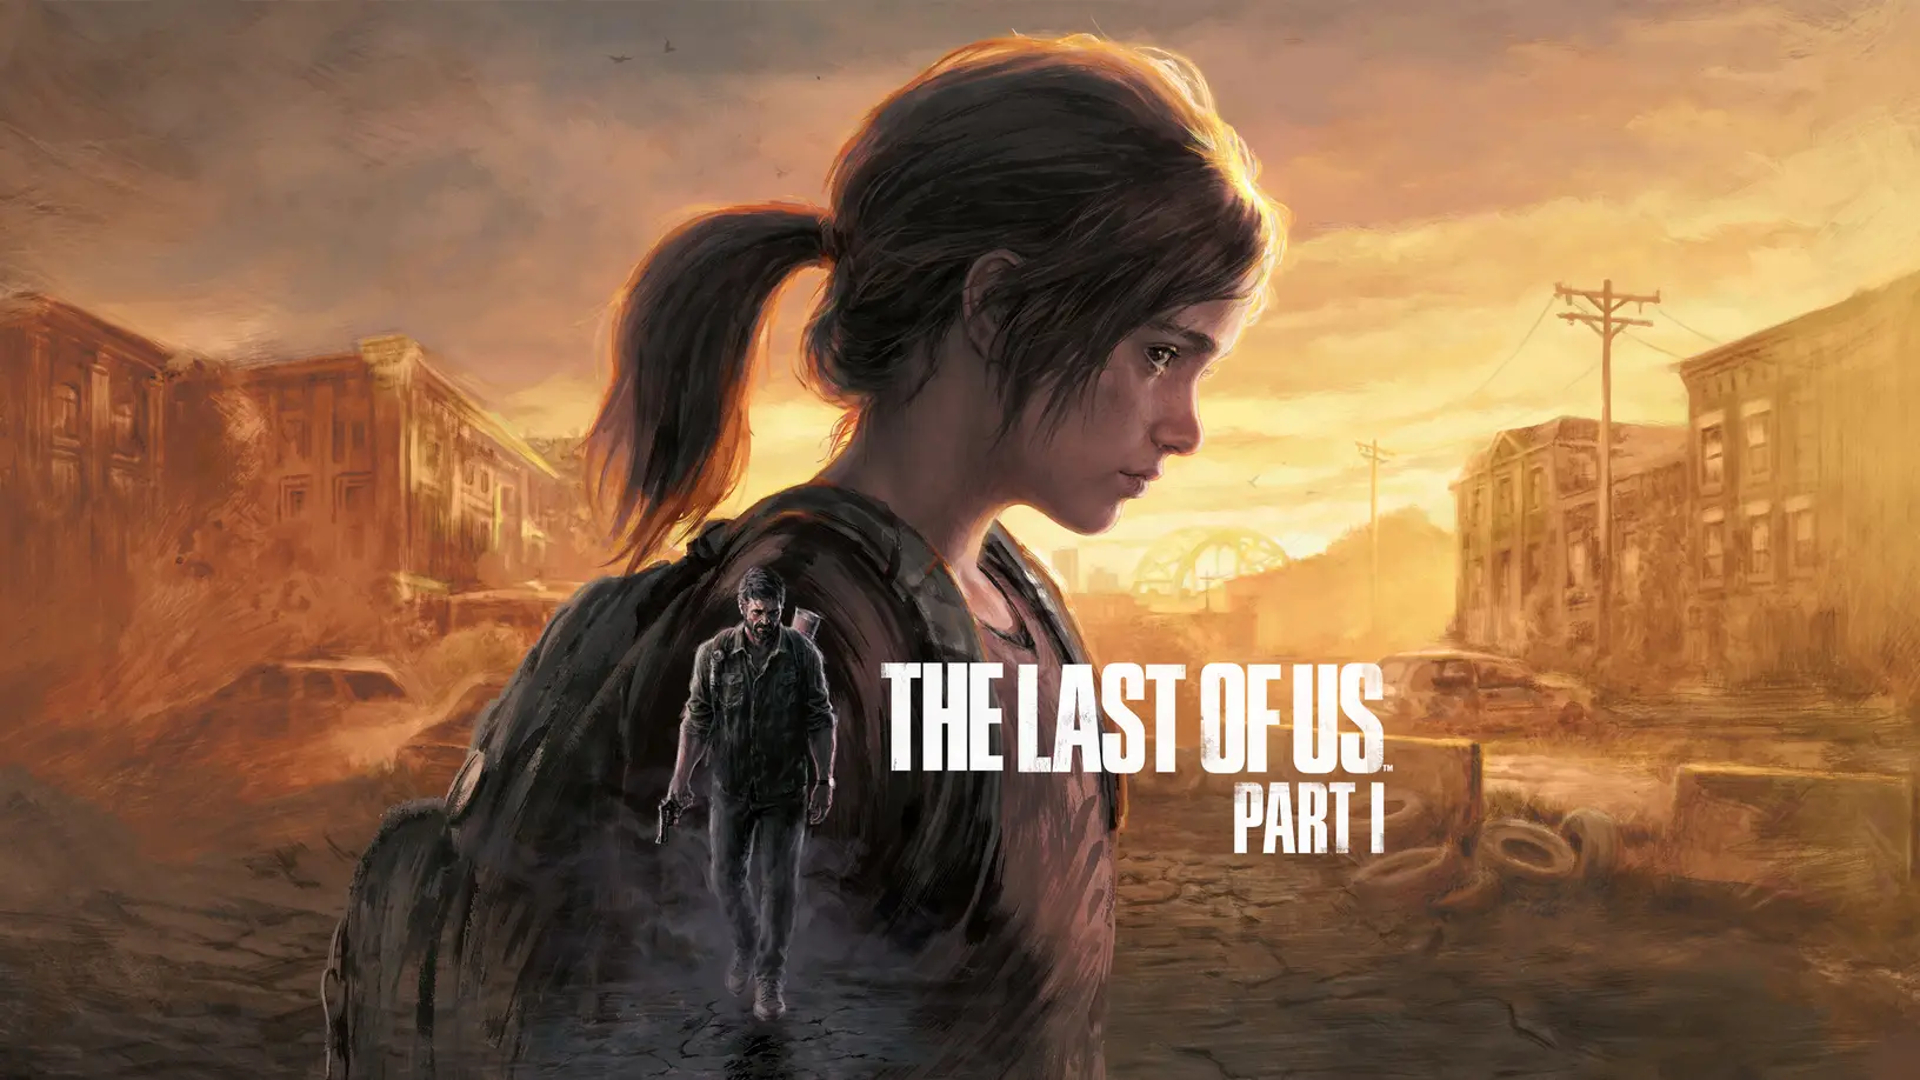 The Last of Us Part 1 Wallpaper